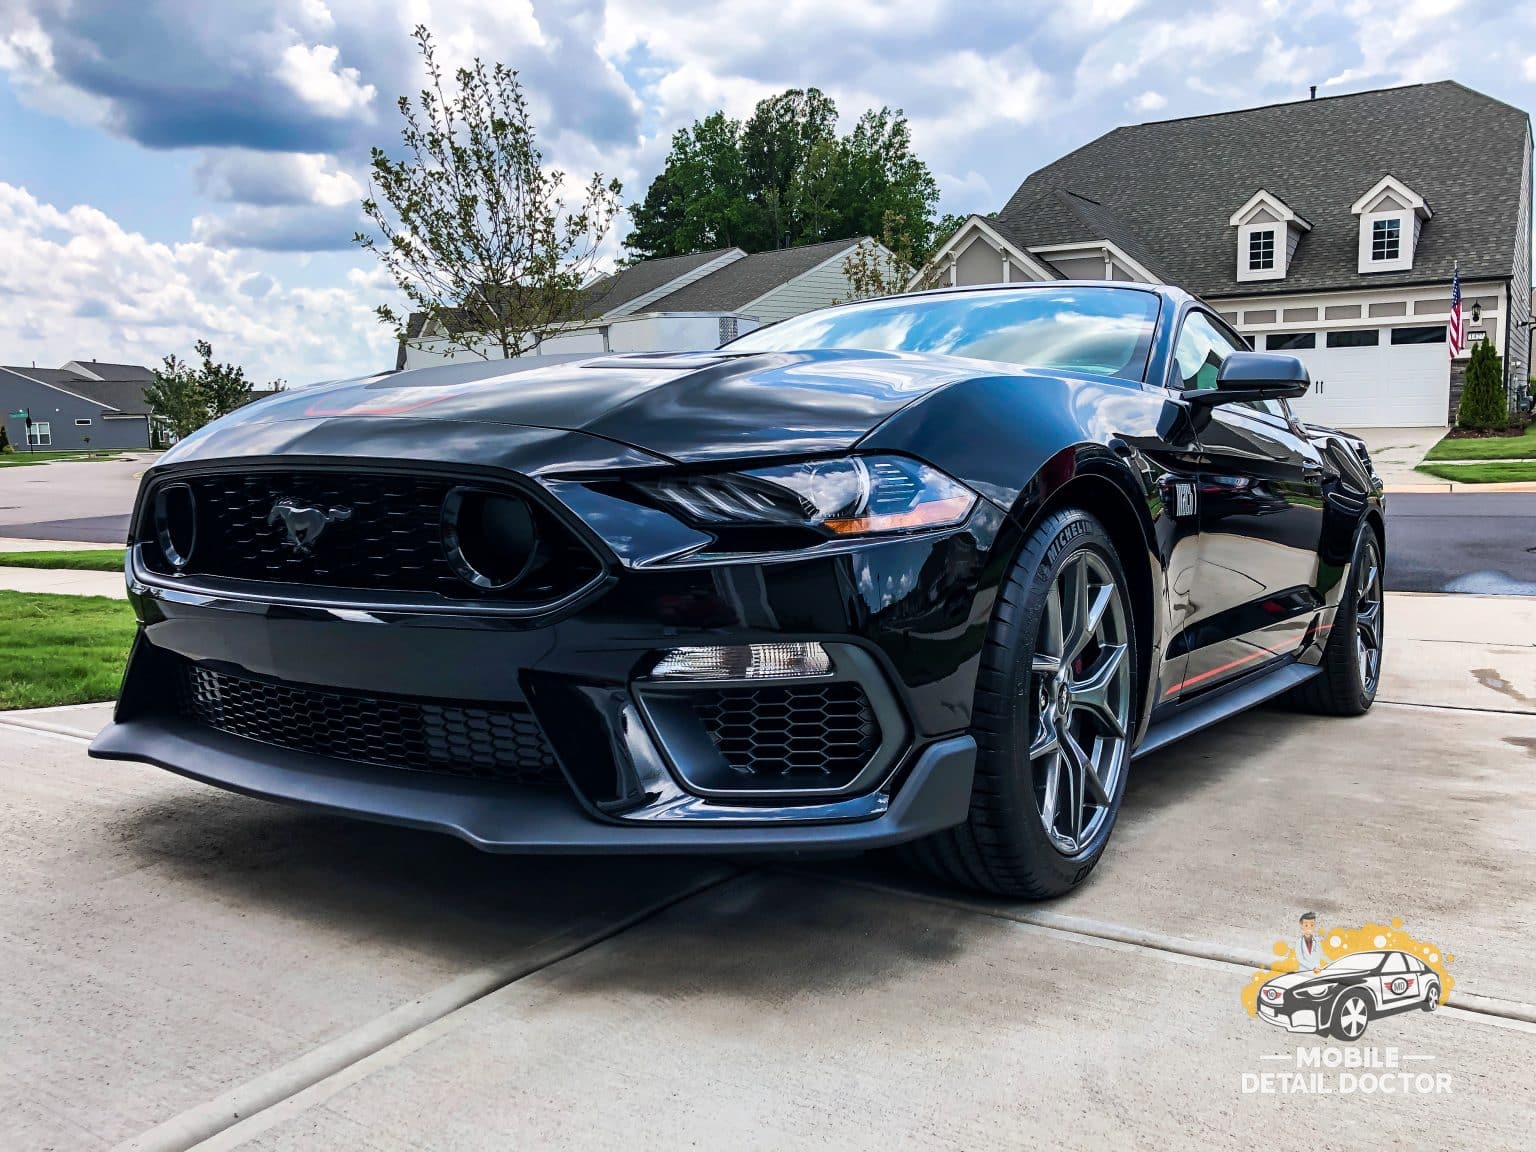 Ceramic coating near me on a Ford Mustang Mach One. Our client requested ceramic pro protection and a full mobile car detail. This black beast shined like no other after detailing and Ceramic Pro's ceramic coating system.